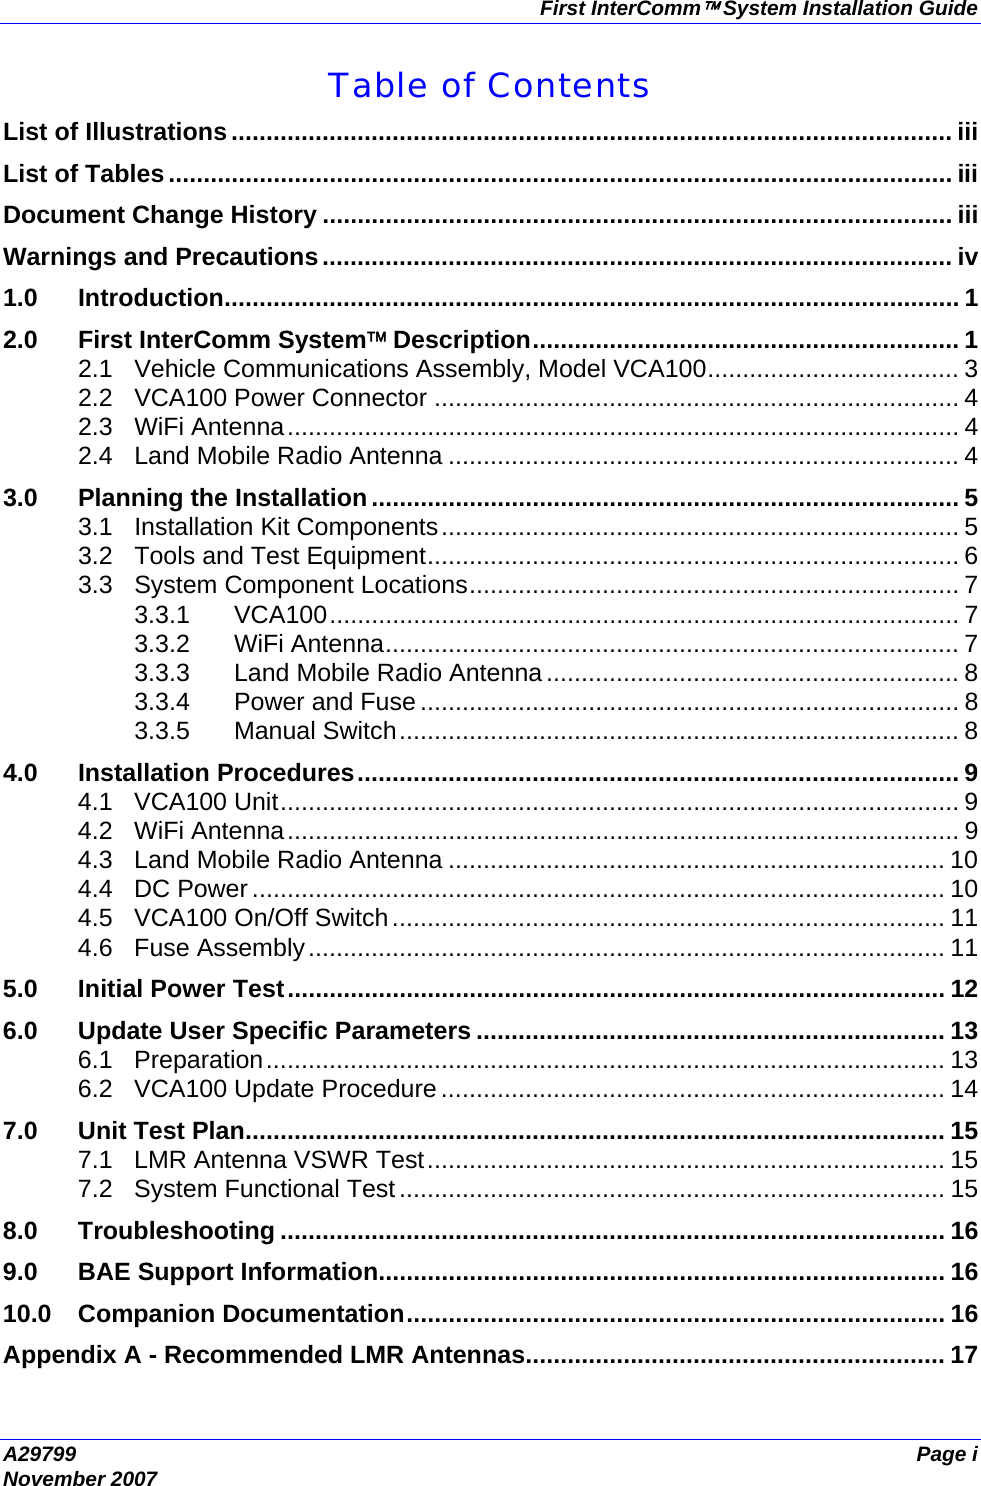 First InterComm™ System Installation Guide A29799  Page i November 2007  Table of Contents List of Illustrations....................................................................................................... iii List of Tables................................................................................................................ iii Document Change History .......................................................................................... iii Warnings and Precautions.......................................................................................... iv 1.0 Introduction......................................................................................................... 1 2.0 First InterComm System™ Description............................................................. 1 2.1 Vehicle Communications Assembly, Model VCA100.................................... 3 2.2 VCA100 Power Connector ........................................................................... 4 2.3 WiFi Antenna................................................................................................ 4 2.4 Land Mobile Radio Antenna ......................................................................... 4 3.0 Planning the Installation.................................................................................... 5 3.1 Installation Kit Components.......................................................................... 5 3.2 Tools and Test Equipment............................................................................ 6 3.3 System Component Locations...................................................................... 7 3.3.1 VCA100.......................................................................................... 7 3.3.2 WiFi Antenna.................................................................................. 7 3.3.3 Land Mobile Radio Antenna ........................................................... 8 3.3.4 Power and Fuse ............................................................................. 8 3.3.5 Manual Switch................................................................................ 8 4.0 Installation Procedures...................................................................................... 9 4.1 VCA100 Unit................................................................................................. 9 4.2 WiFi Antenna................................................................................................ 9 4.3 Land Mobile Radio Antenna ....................................................................... 10 4.4 DC Power ................................................................................................... 10 4.5 VCA100 On/Off Switch............................................................................... 11 4.6 Fuse Assembly........................................................................................... 11 5.0 Initial Power Test.............................................................................................. 12 6.0 Update User Specific Parameters ................................................................... 13 6.1 Preparation................................................................................................. 13 6.2 VCA100 Update Procedure ........................................................................ 14 7.0 Unit Test Plan.................................................................................................... 15 7.1 LMR Antenna VSWR Test.......................................................................... 15 7.2 System Functional Test.............................................................................. 15 8.0 Troubleshooting ............................................................................................... 16 9.0 BAE Support Information................................................................................. 16 10.0 Companion Documentation............................................................................. 16 Appendix A - Recommended LMR Antennas............................................................ 17 